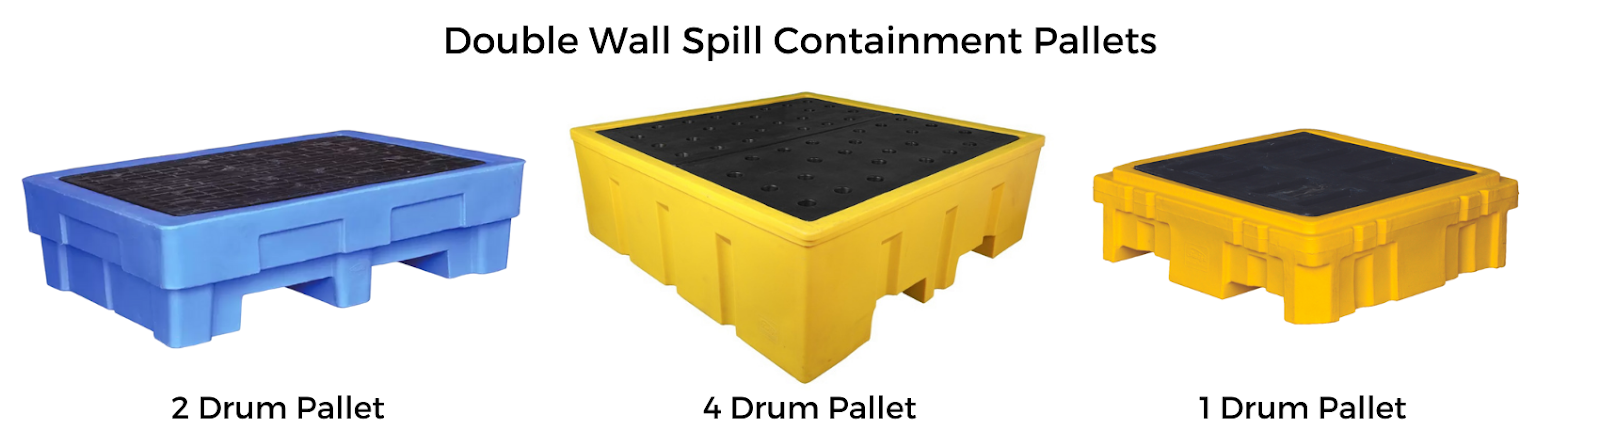 Swift's Double Wall Drum Spill Containment Pallets 